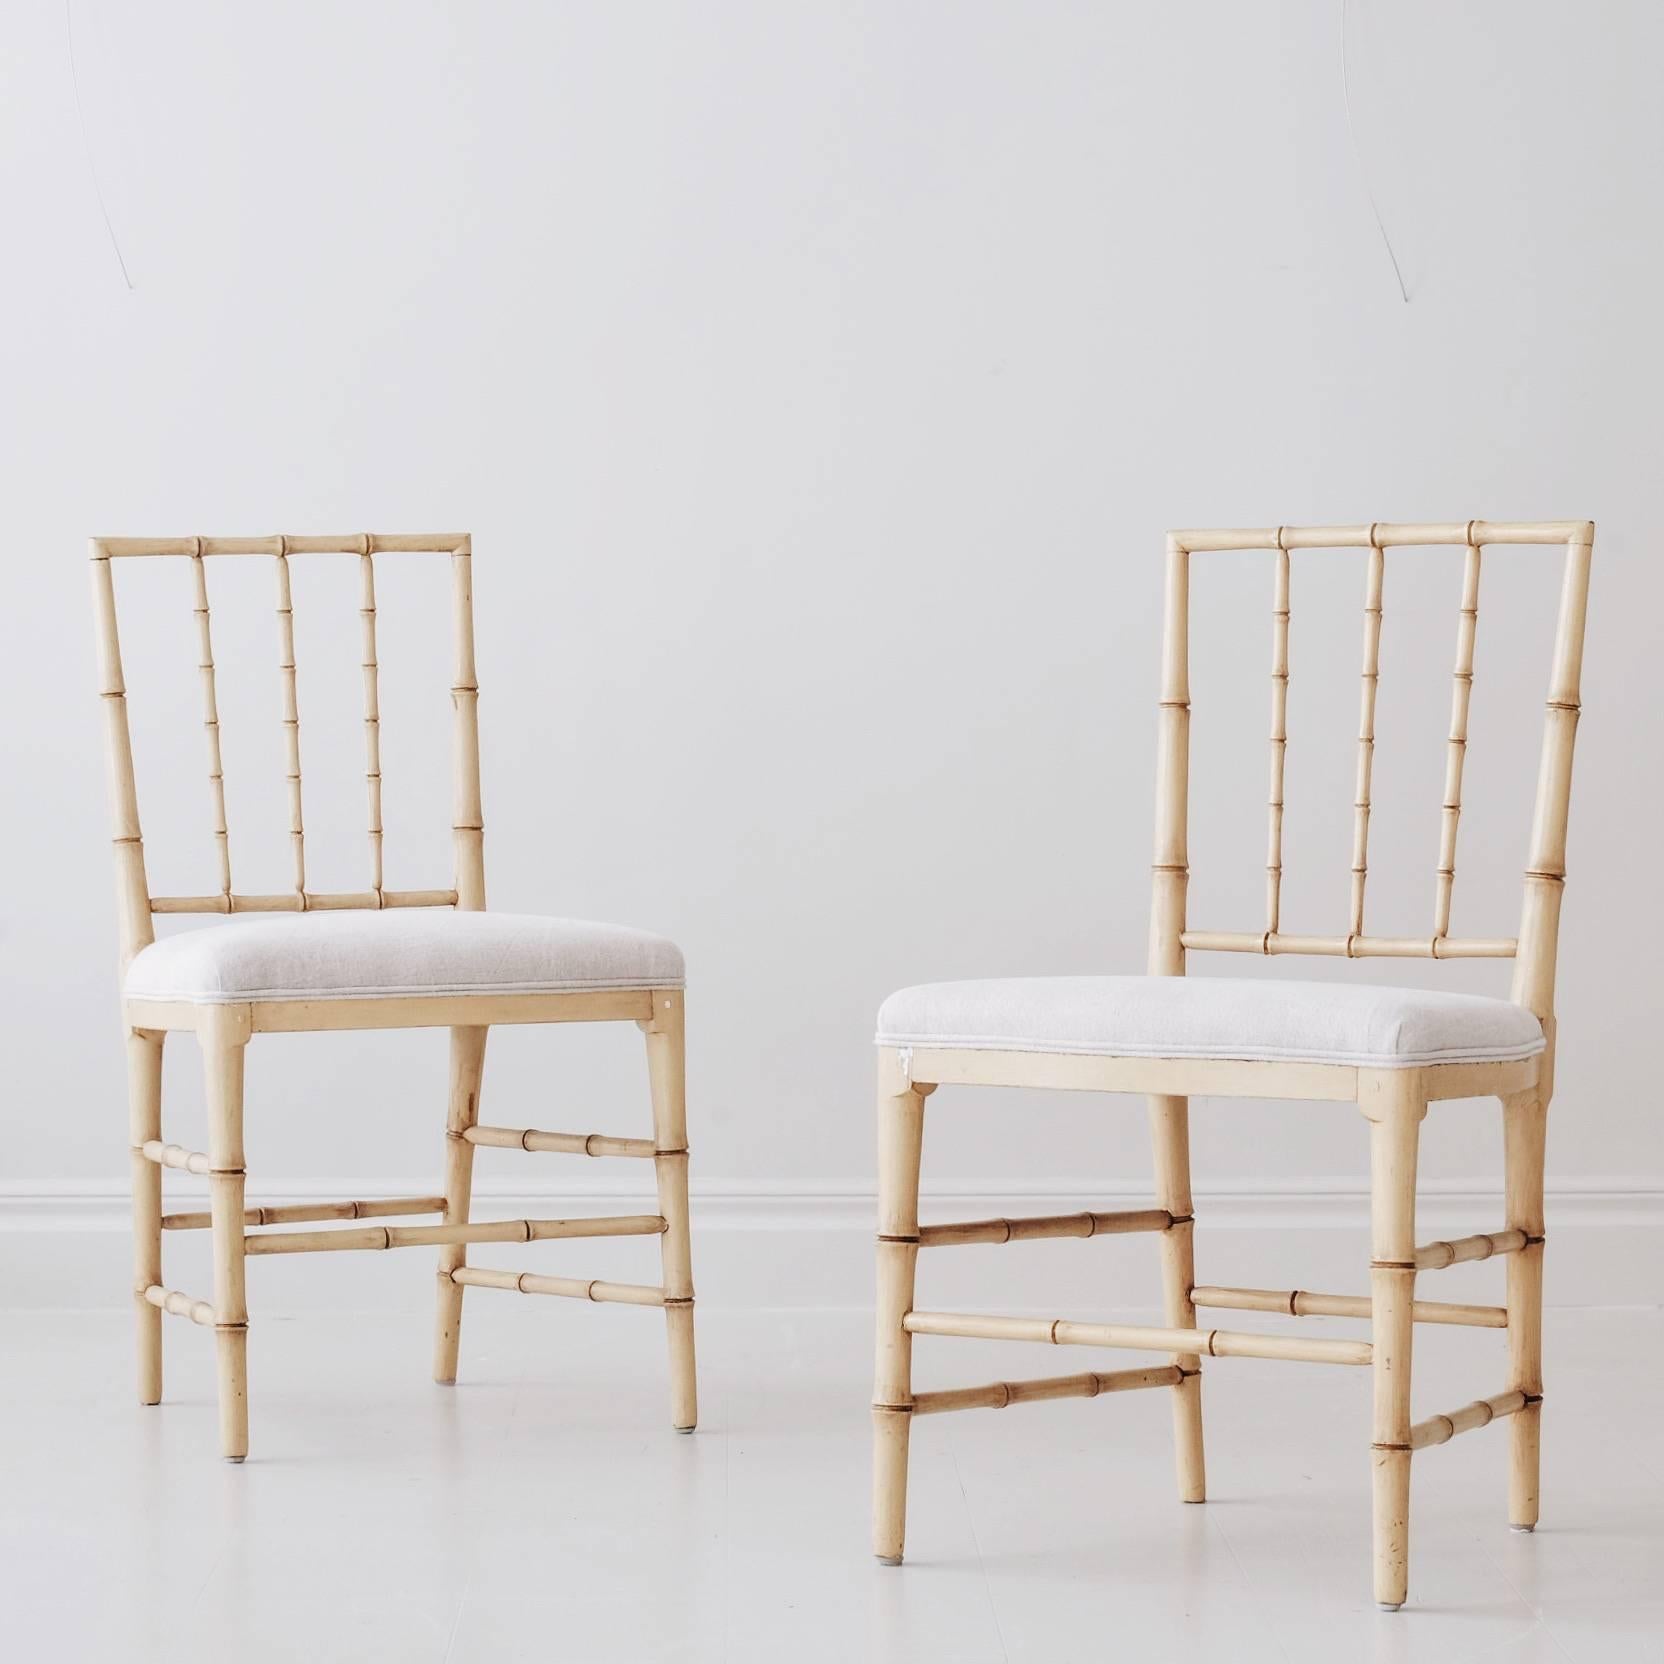 Rare set of four early 19th century Gustavian bamboo imitation dining chairs attributed to Ephraim Sthal. Supplier to the Royal Court and one of the most sophisticated and inventive makers of his period.

Chinese furniture of bamboo became known